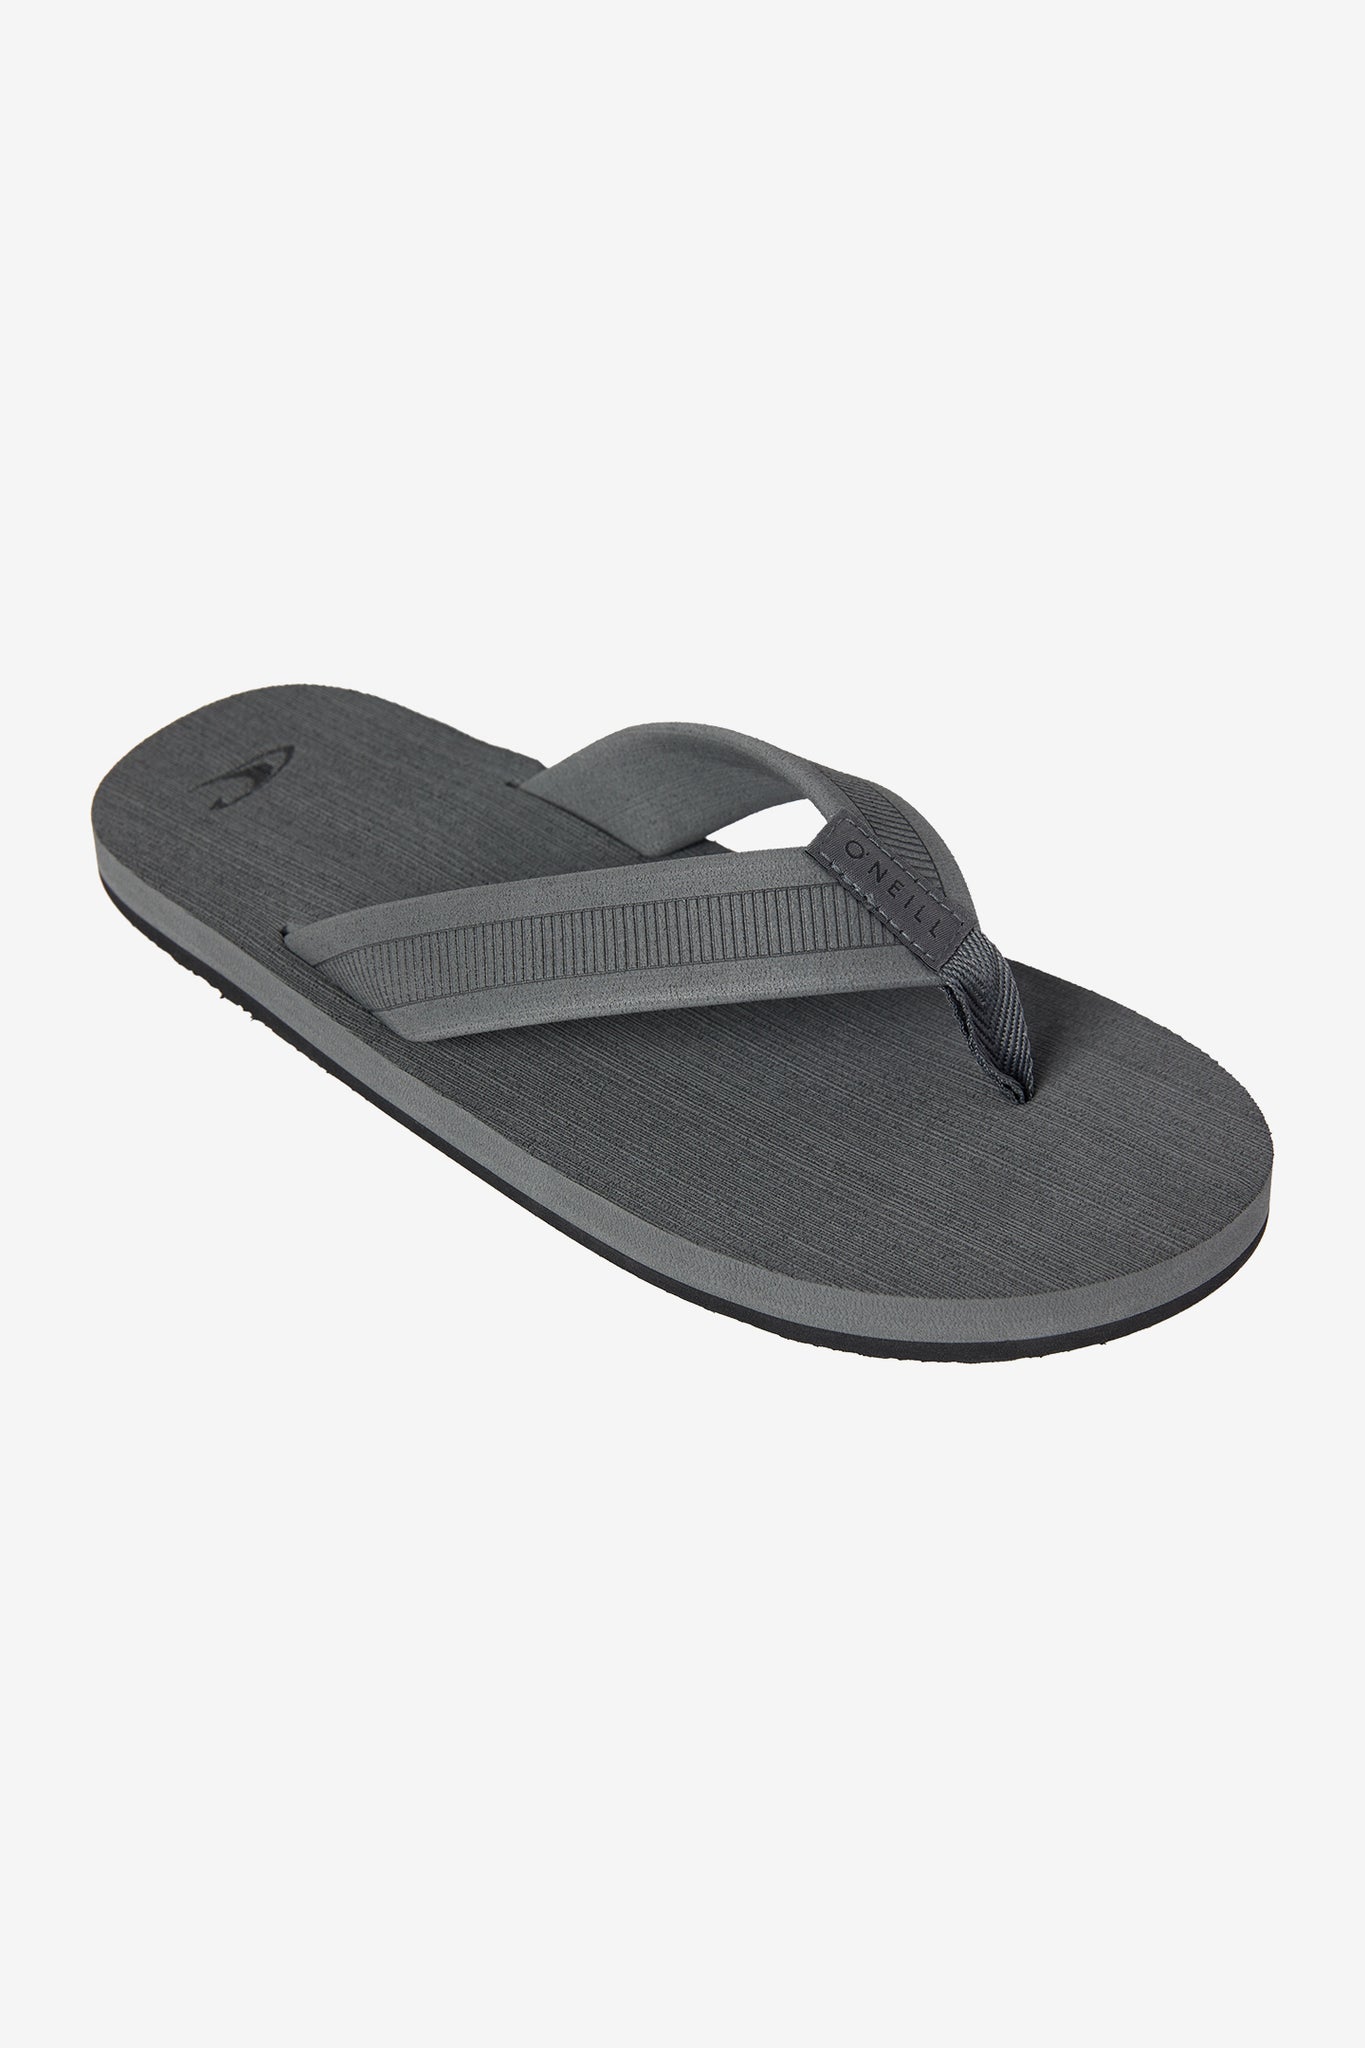 EXPEDITION SANDALS